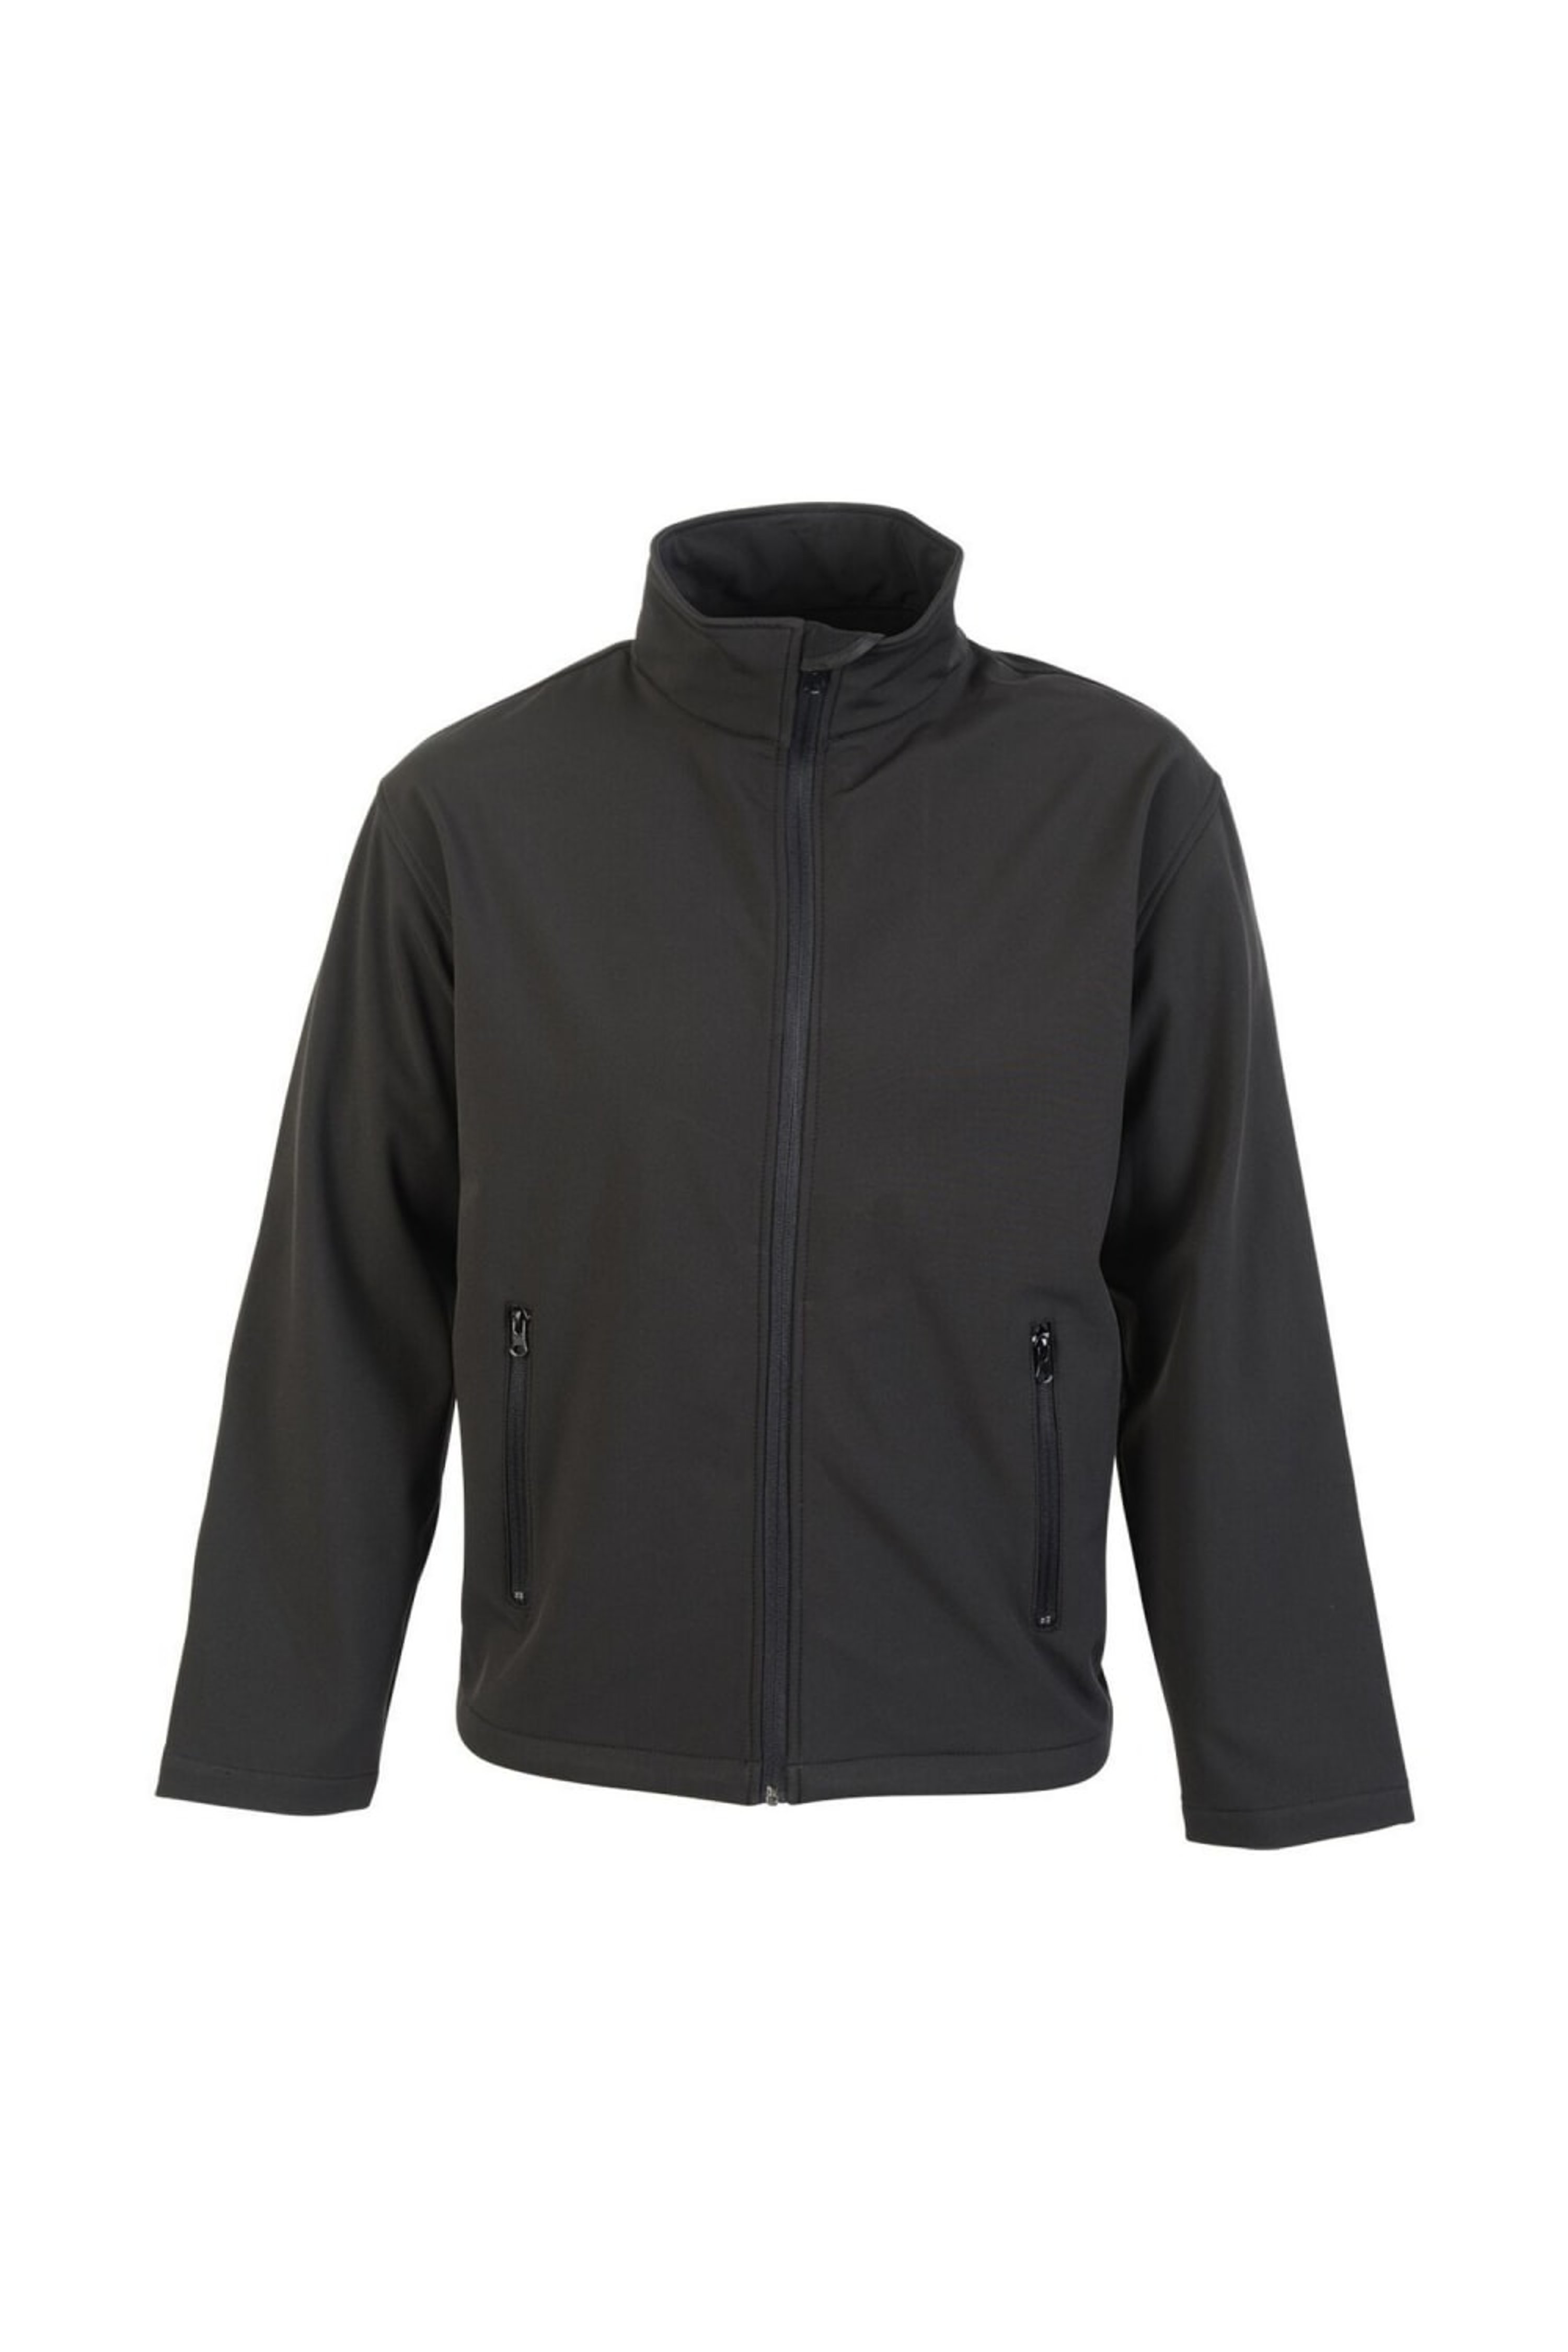 ABSOLUTE APPAREL ABSOLUTE APPAREL MENS CLASSIC SOFTSHELL JACKET